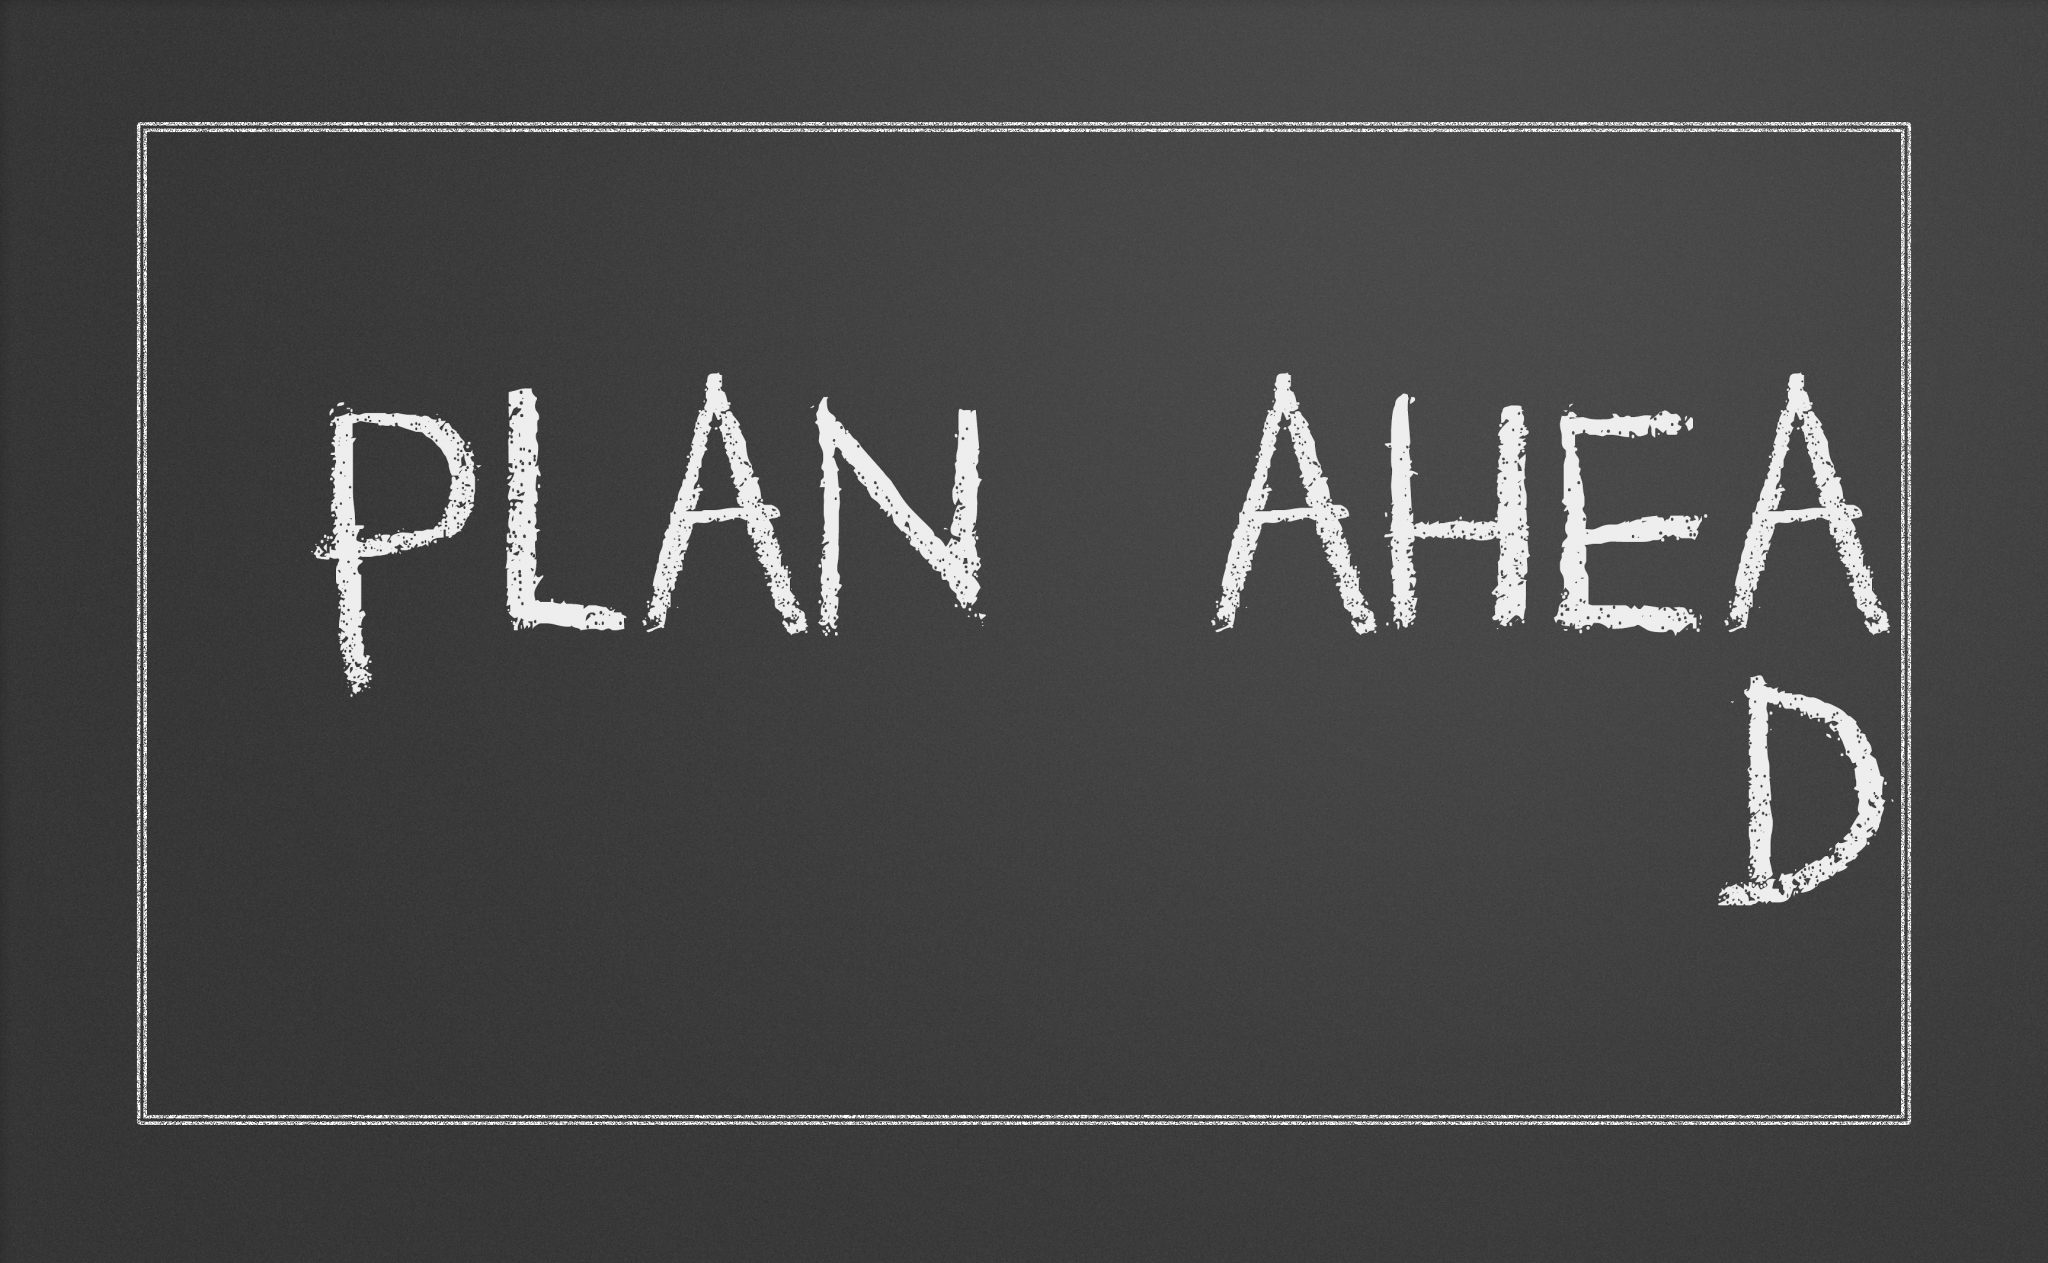 Note to self: planning ahead